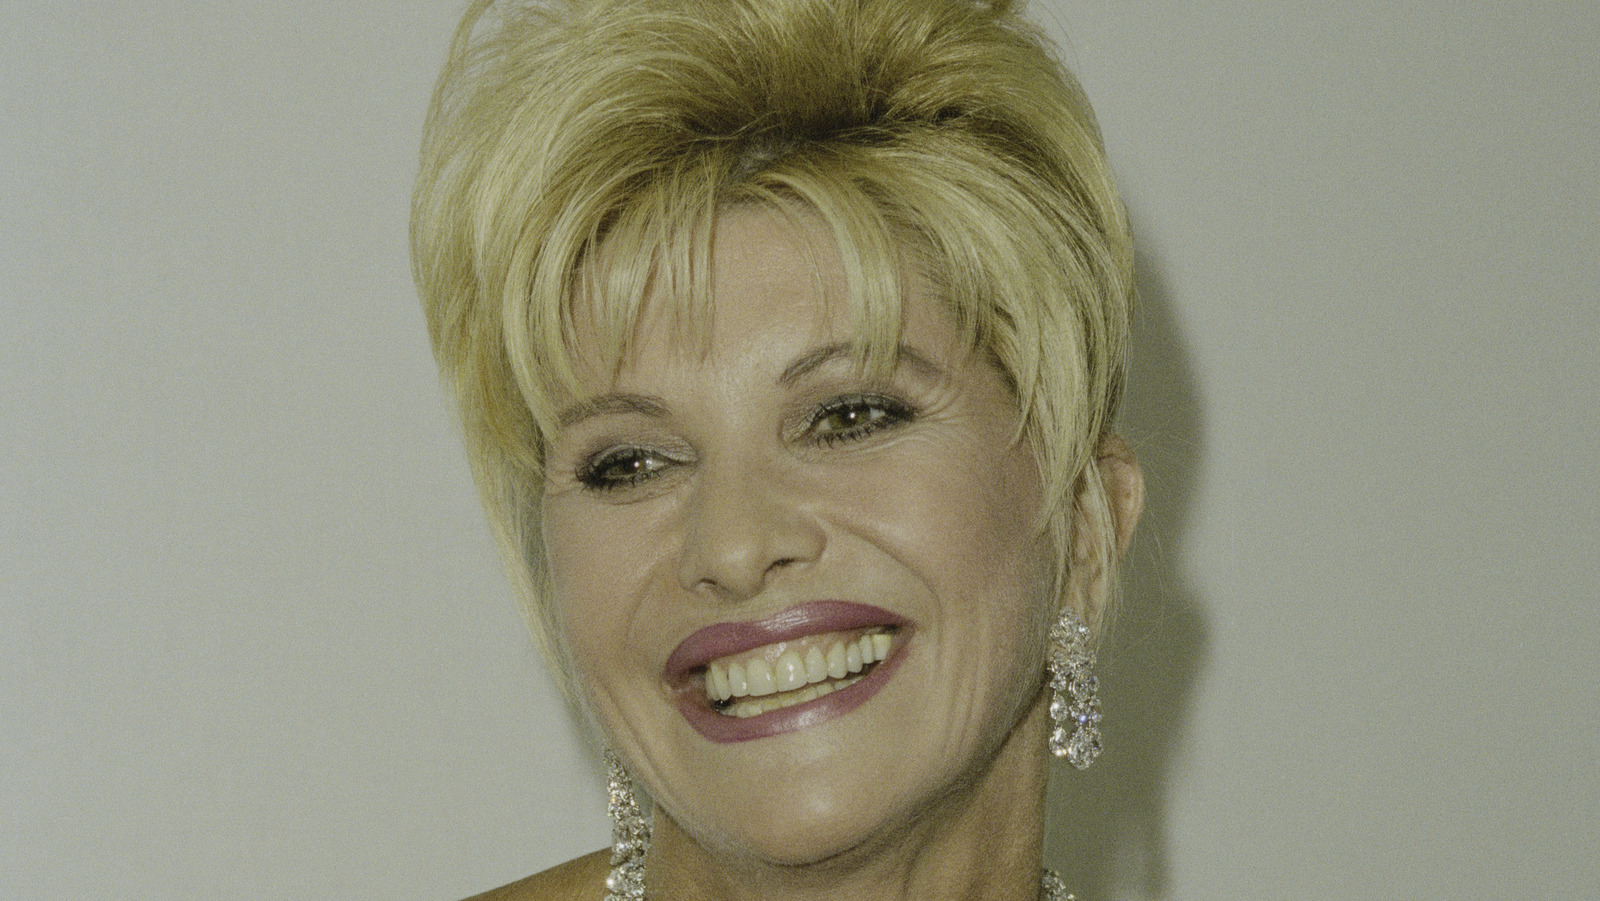 Donald Trump Gets Emotional Over Memories With Ivana